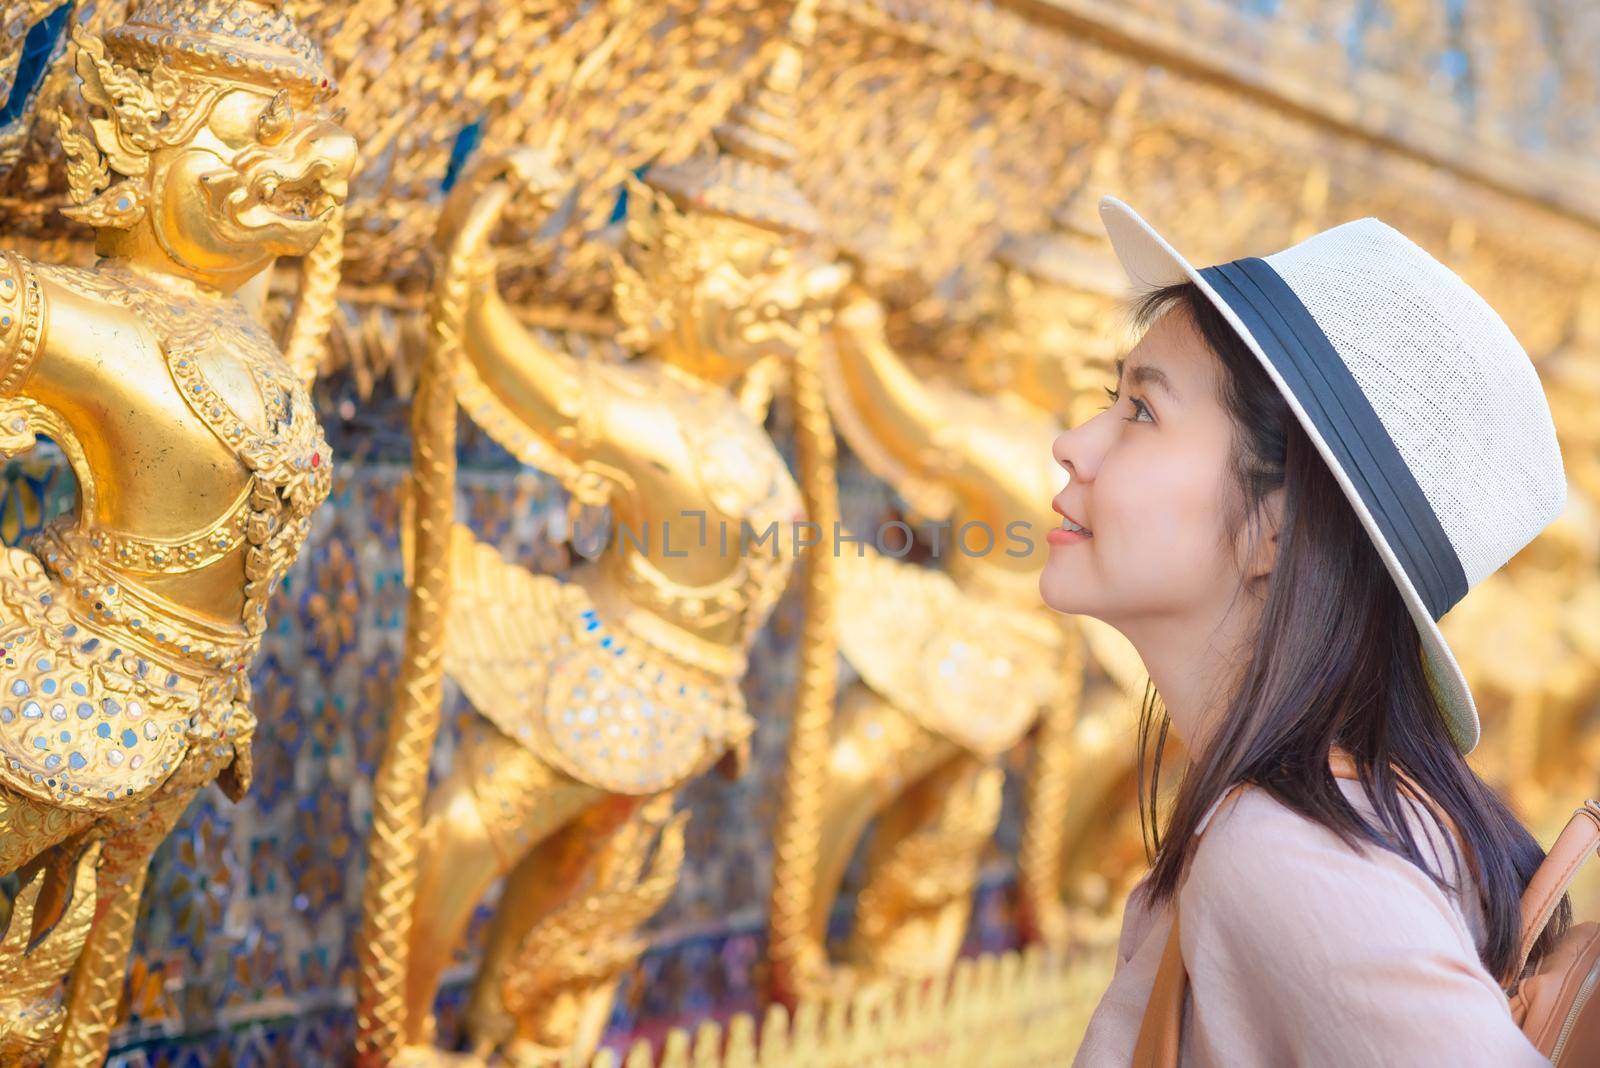 Beautiful asian tourist woman smile and enjoy travel on Vacation in Bangkok at Thailand